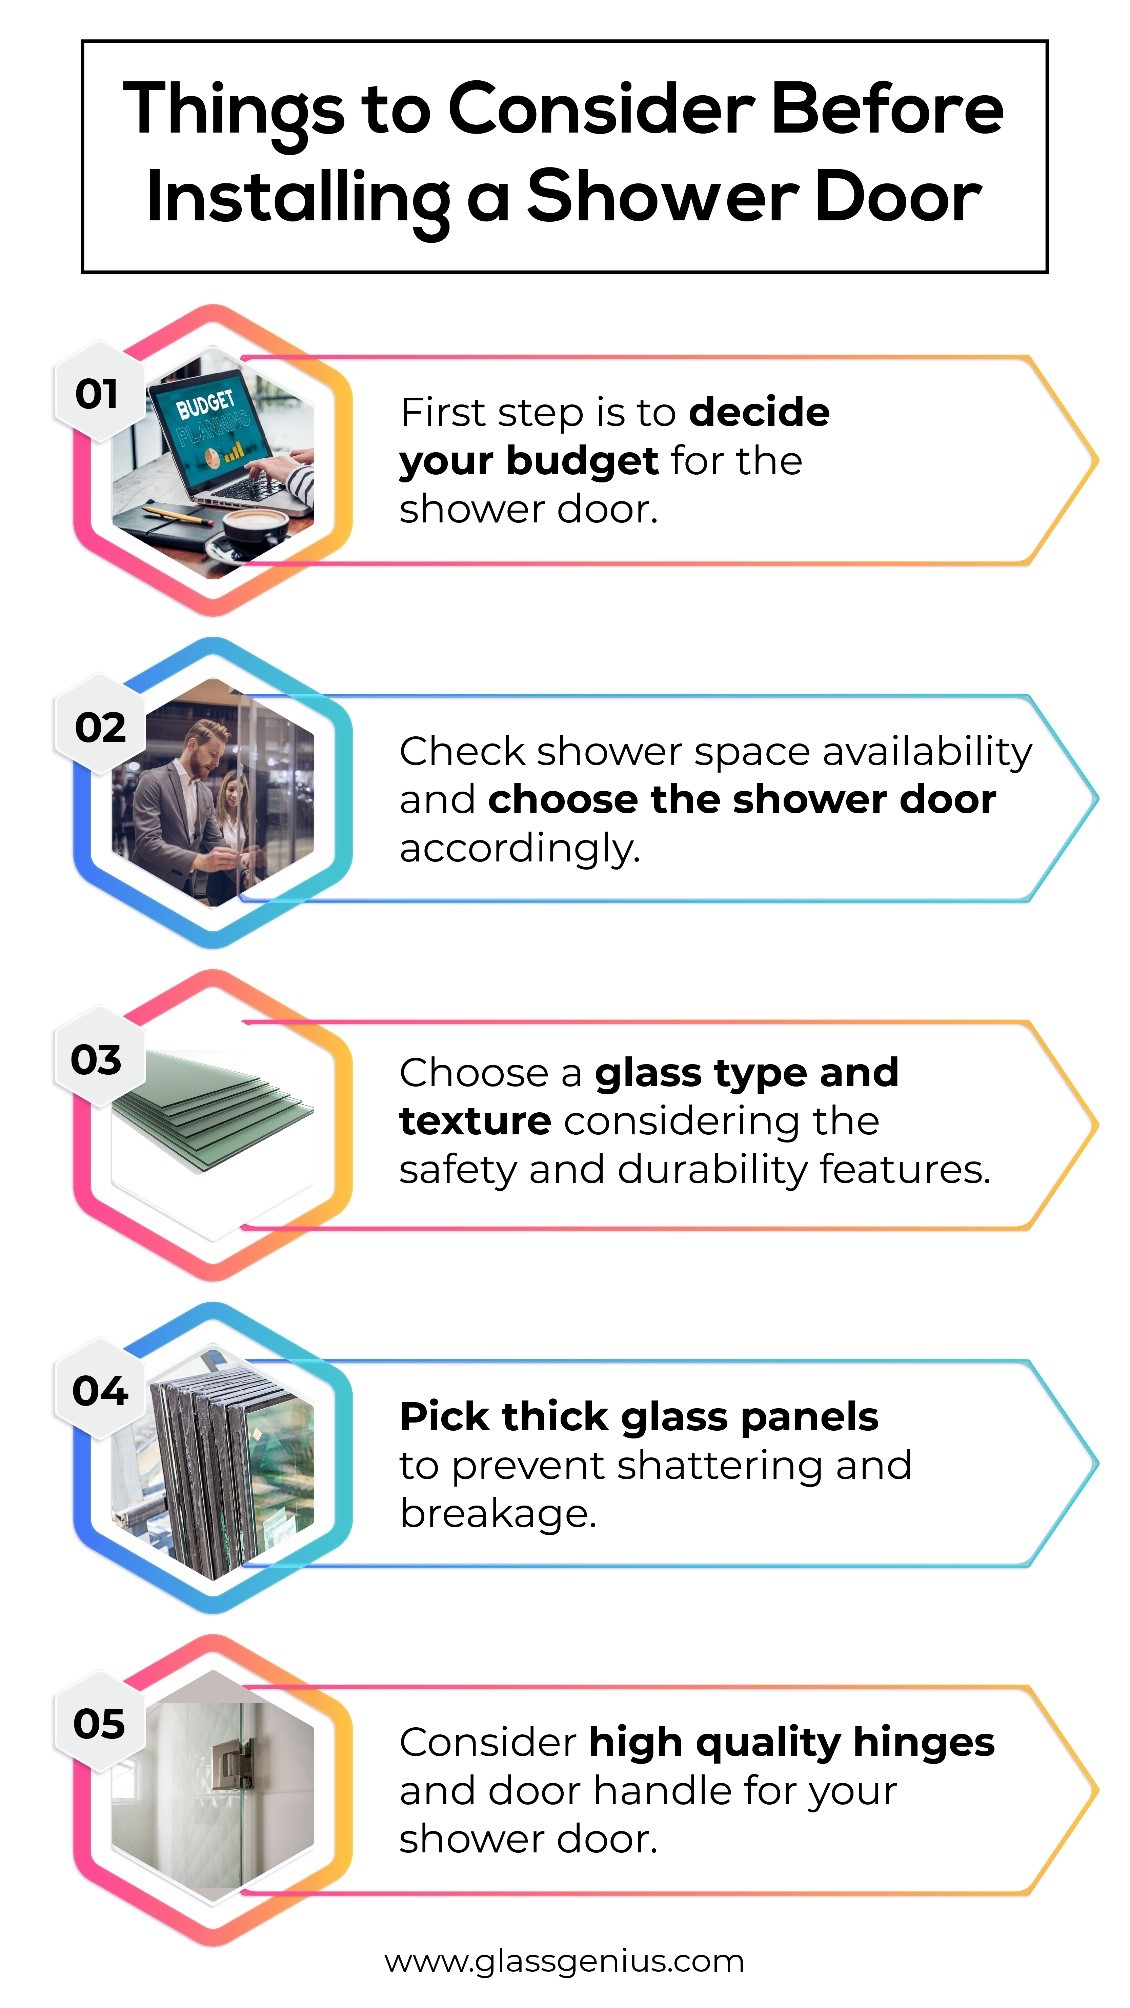 Things You Should Keep in Mind before Installing a Shower Door